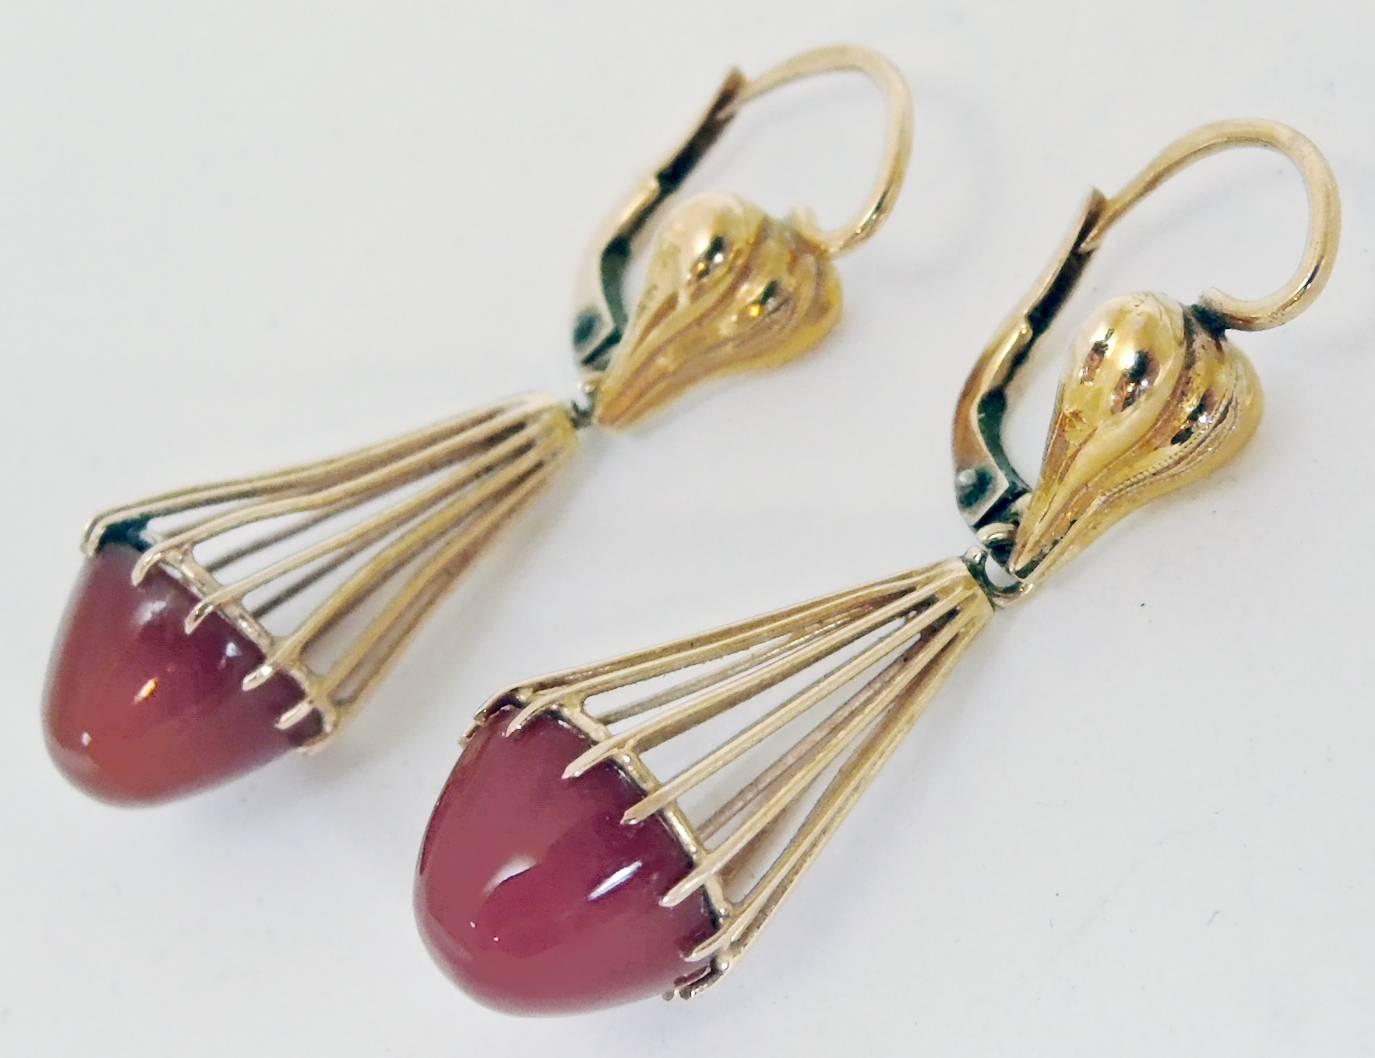 These 18kt gold clip earrings feature a bullet style carnelian stone.  It is prong set and has a cage design. It is made of 18kt gold and measures 1-1/2” x 1/2”. It is in excellent condition.